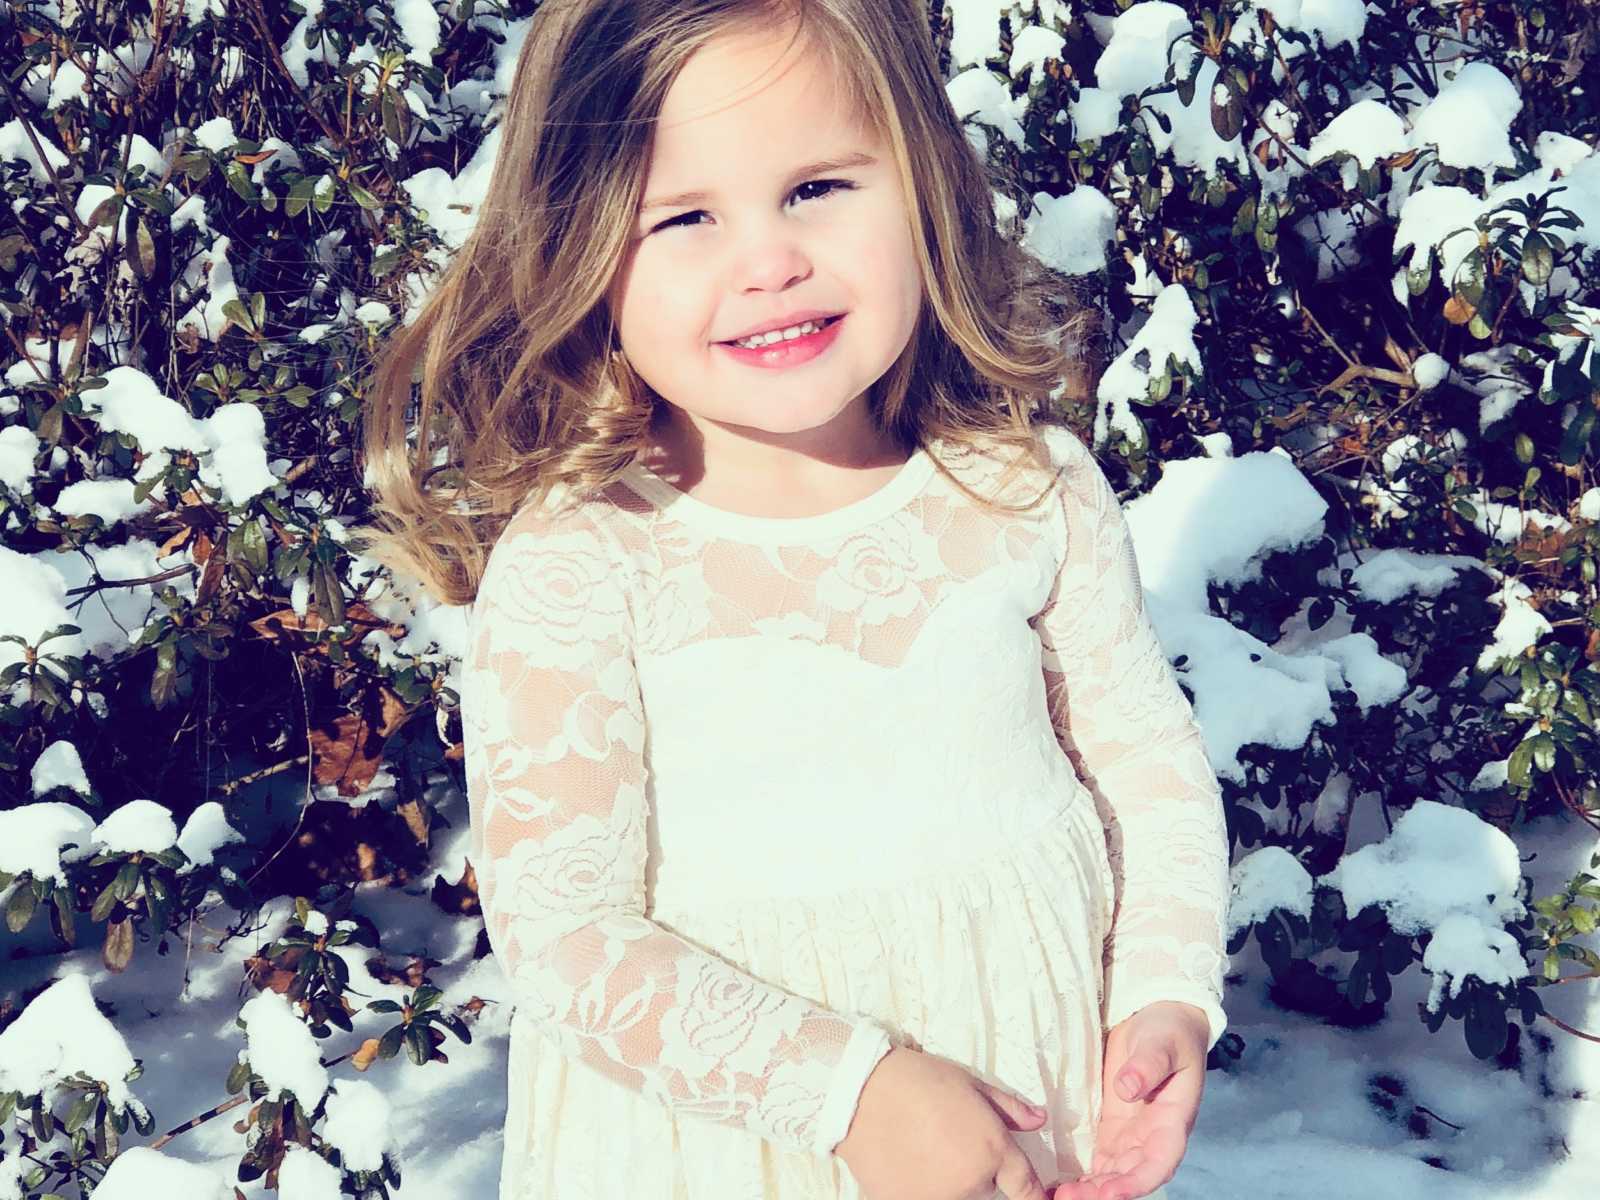 young girl in white floral lace dress smiling in front of snowy bush